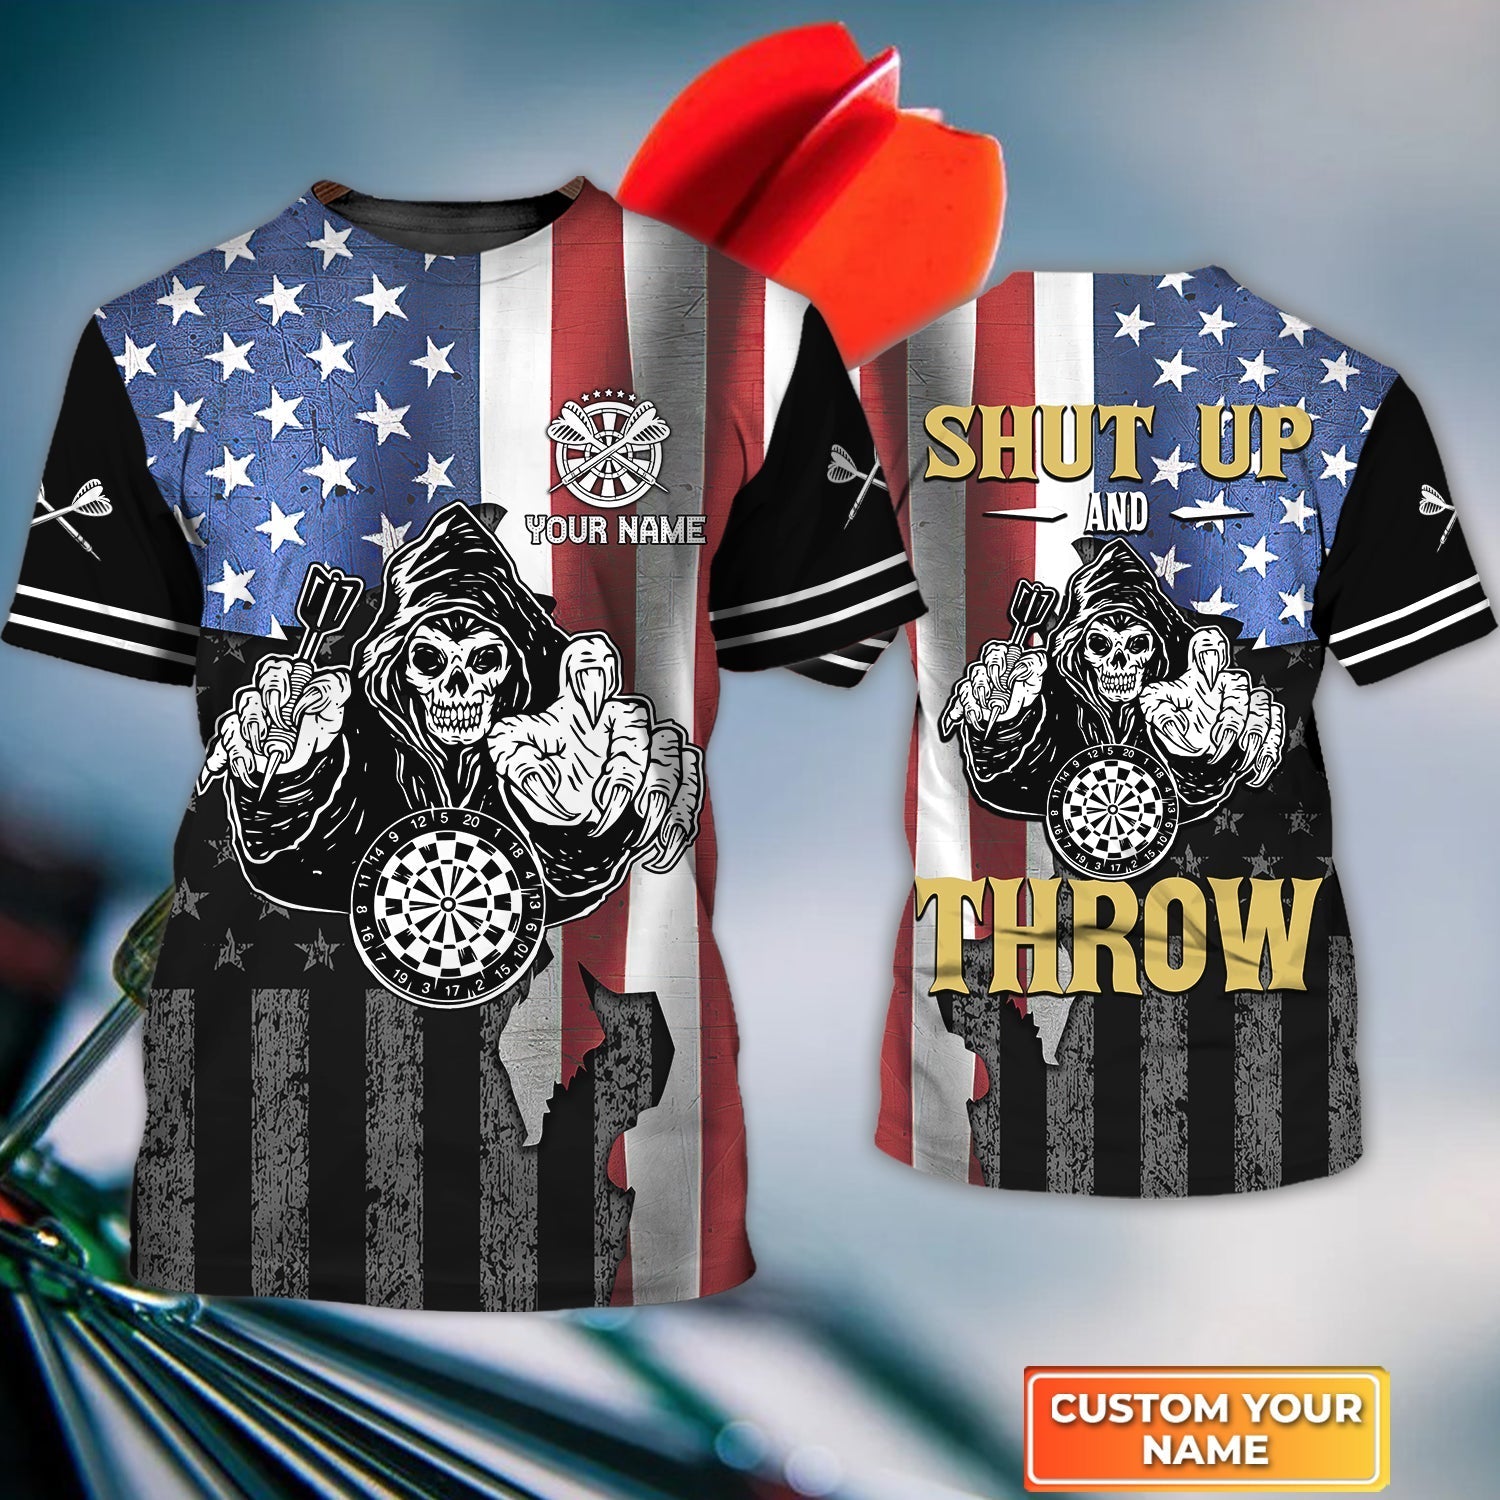 Shut Up And Throw American Flag Personalized Name 3D Tshirt For Darts Player – DT113